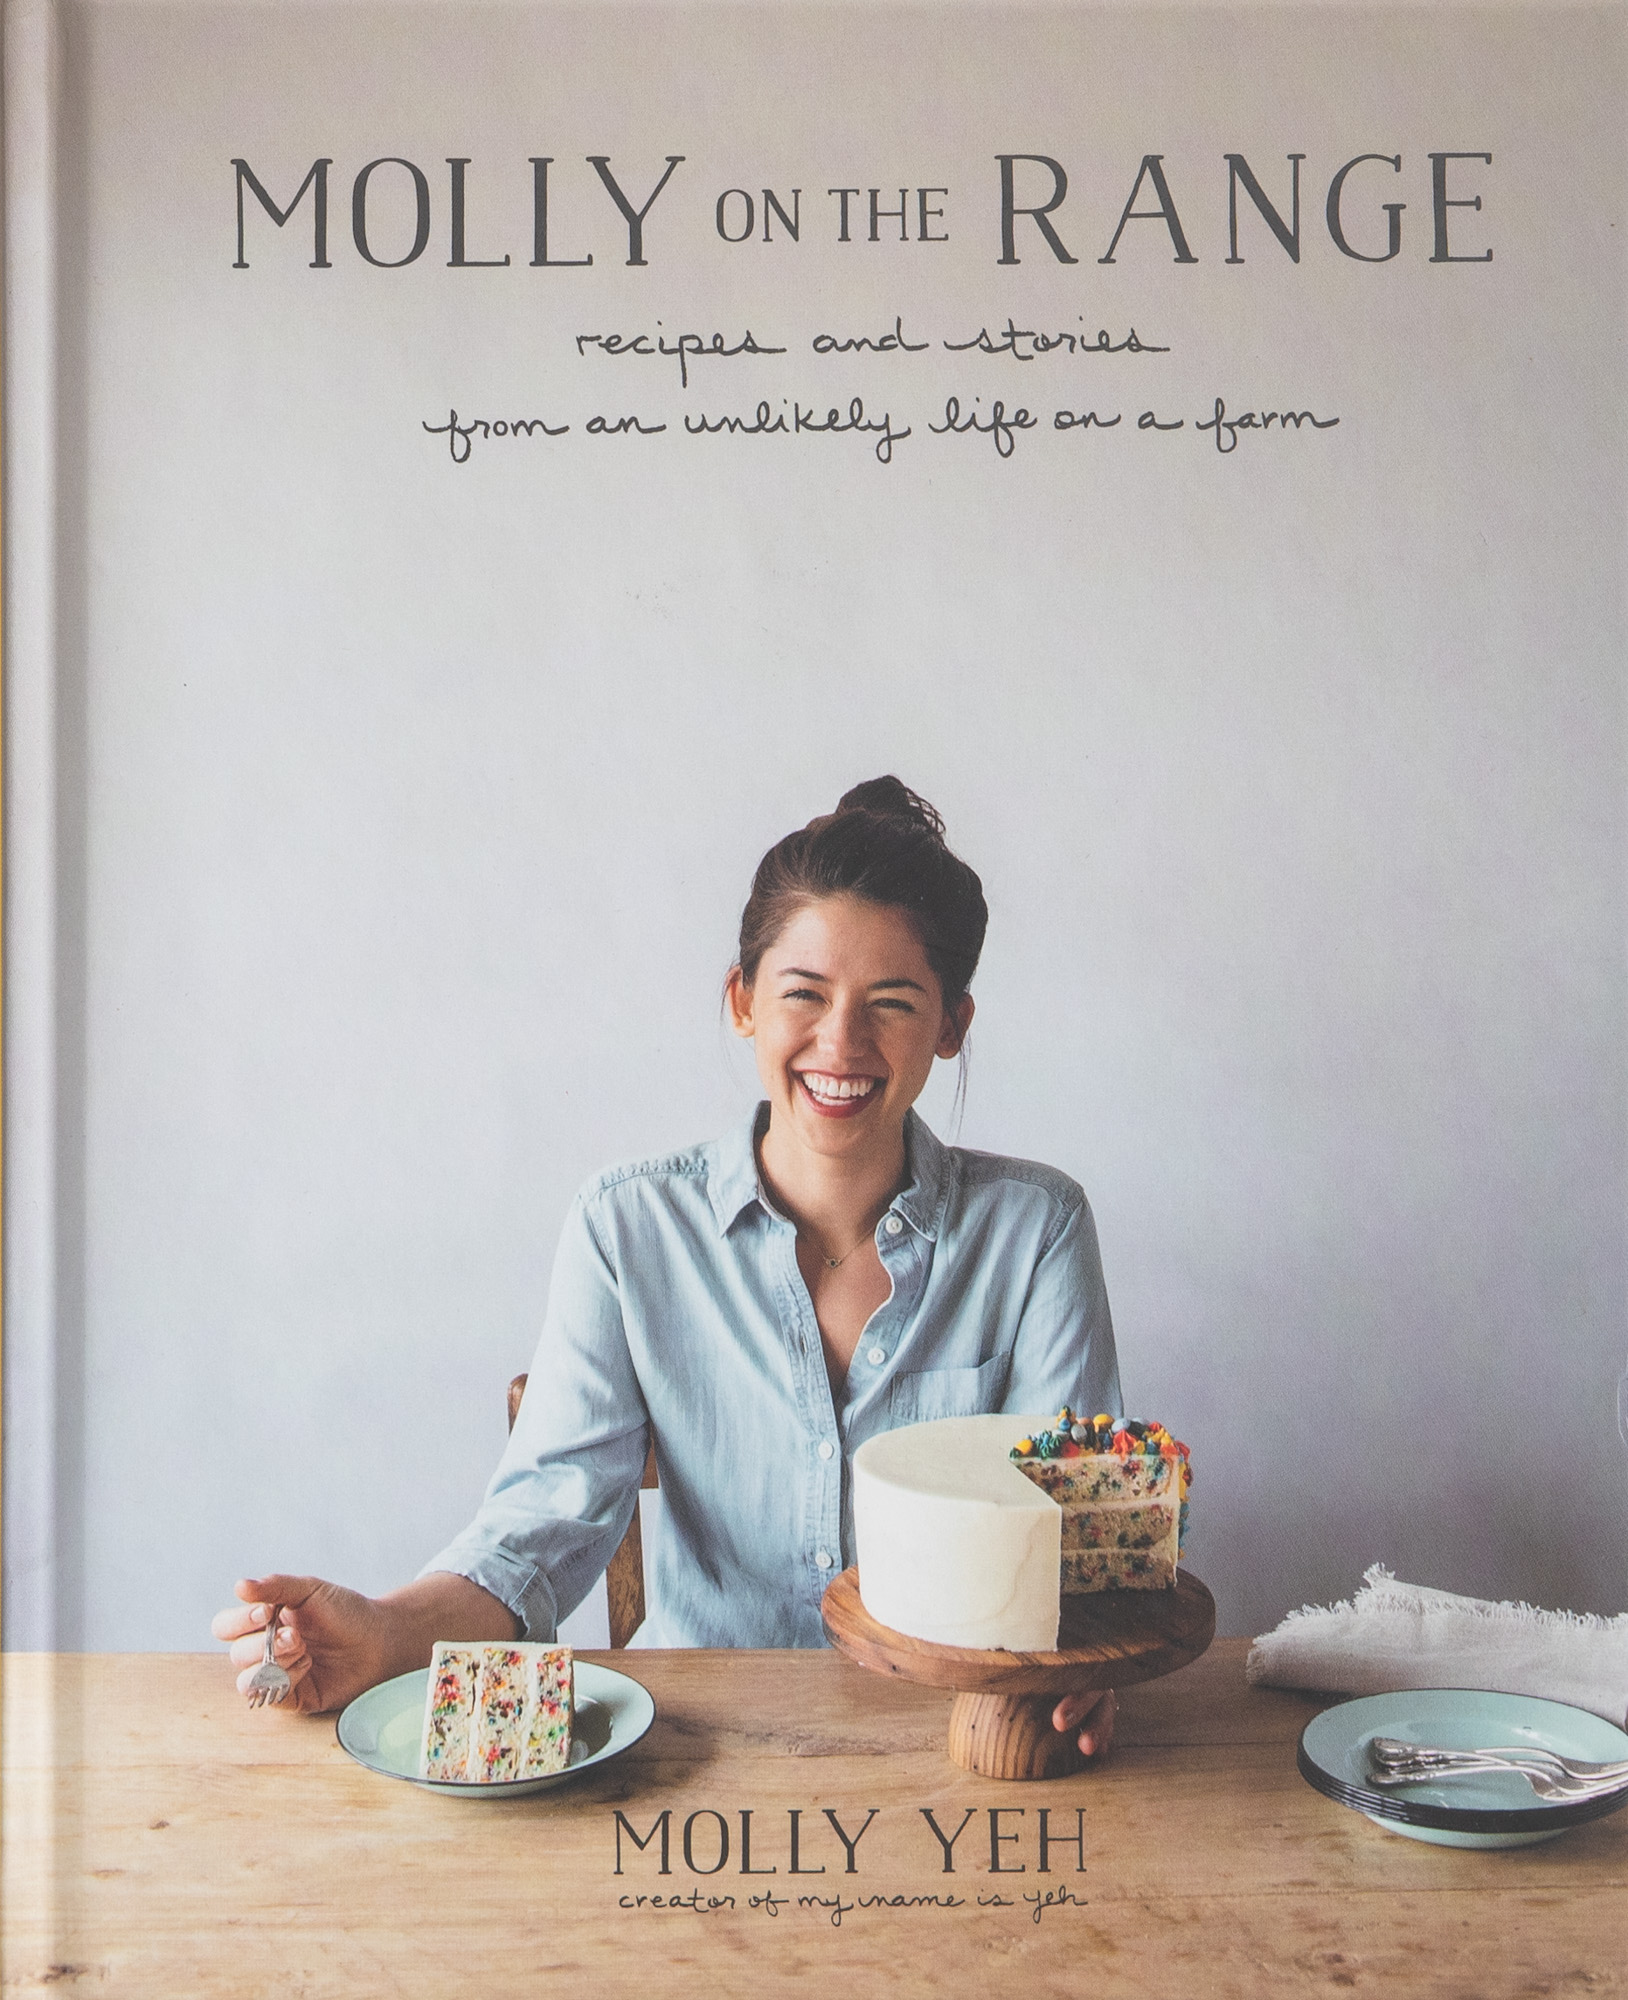 The Cover of the cookbook Molly on the Range: Recipes and Stories From An Unlikely Life on a Farm